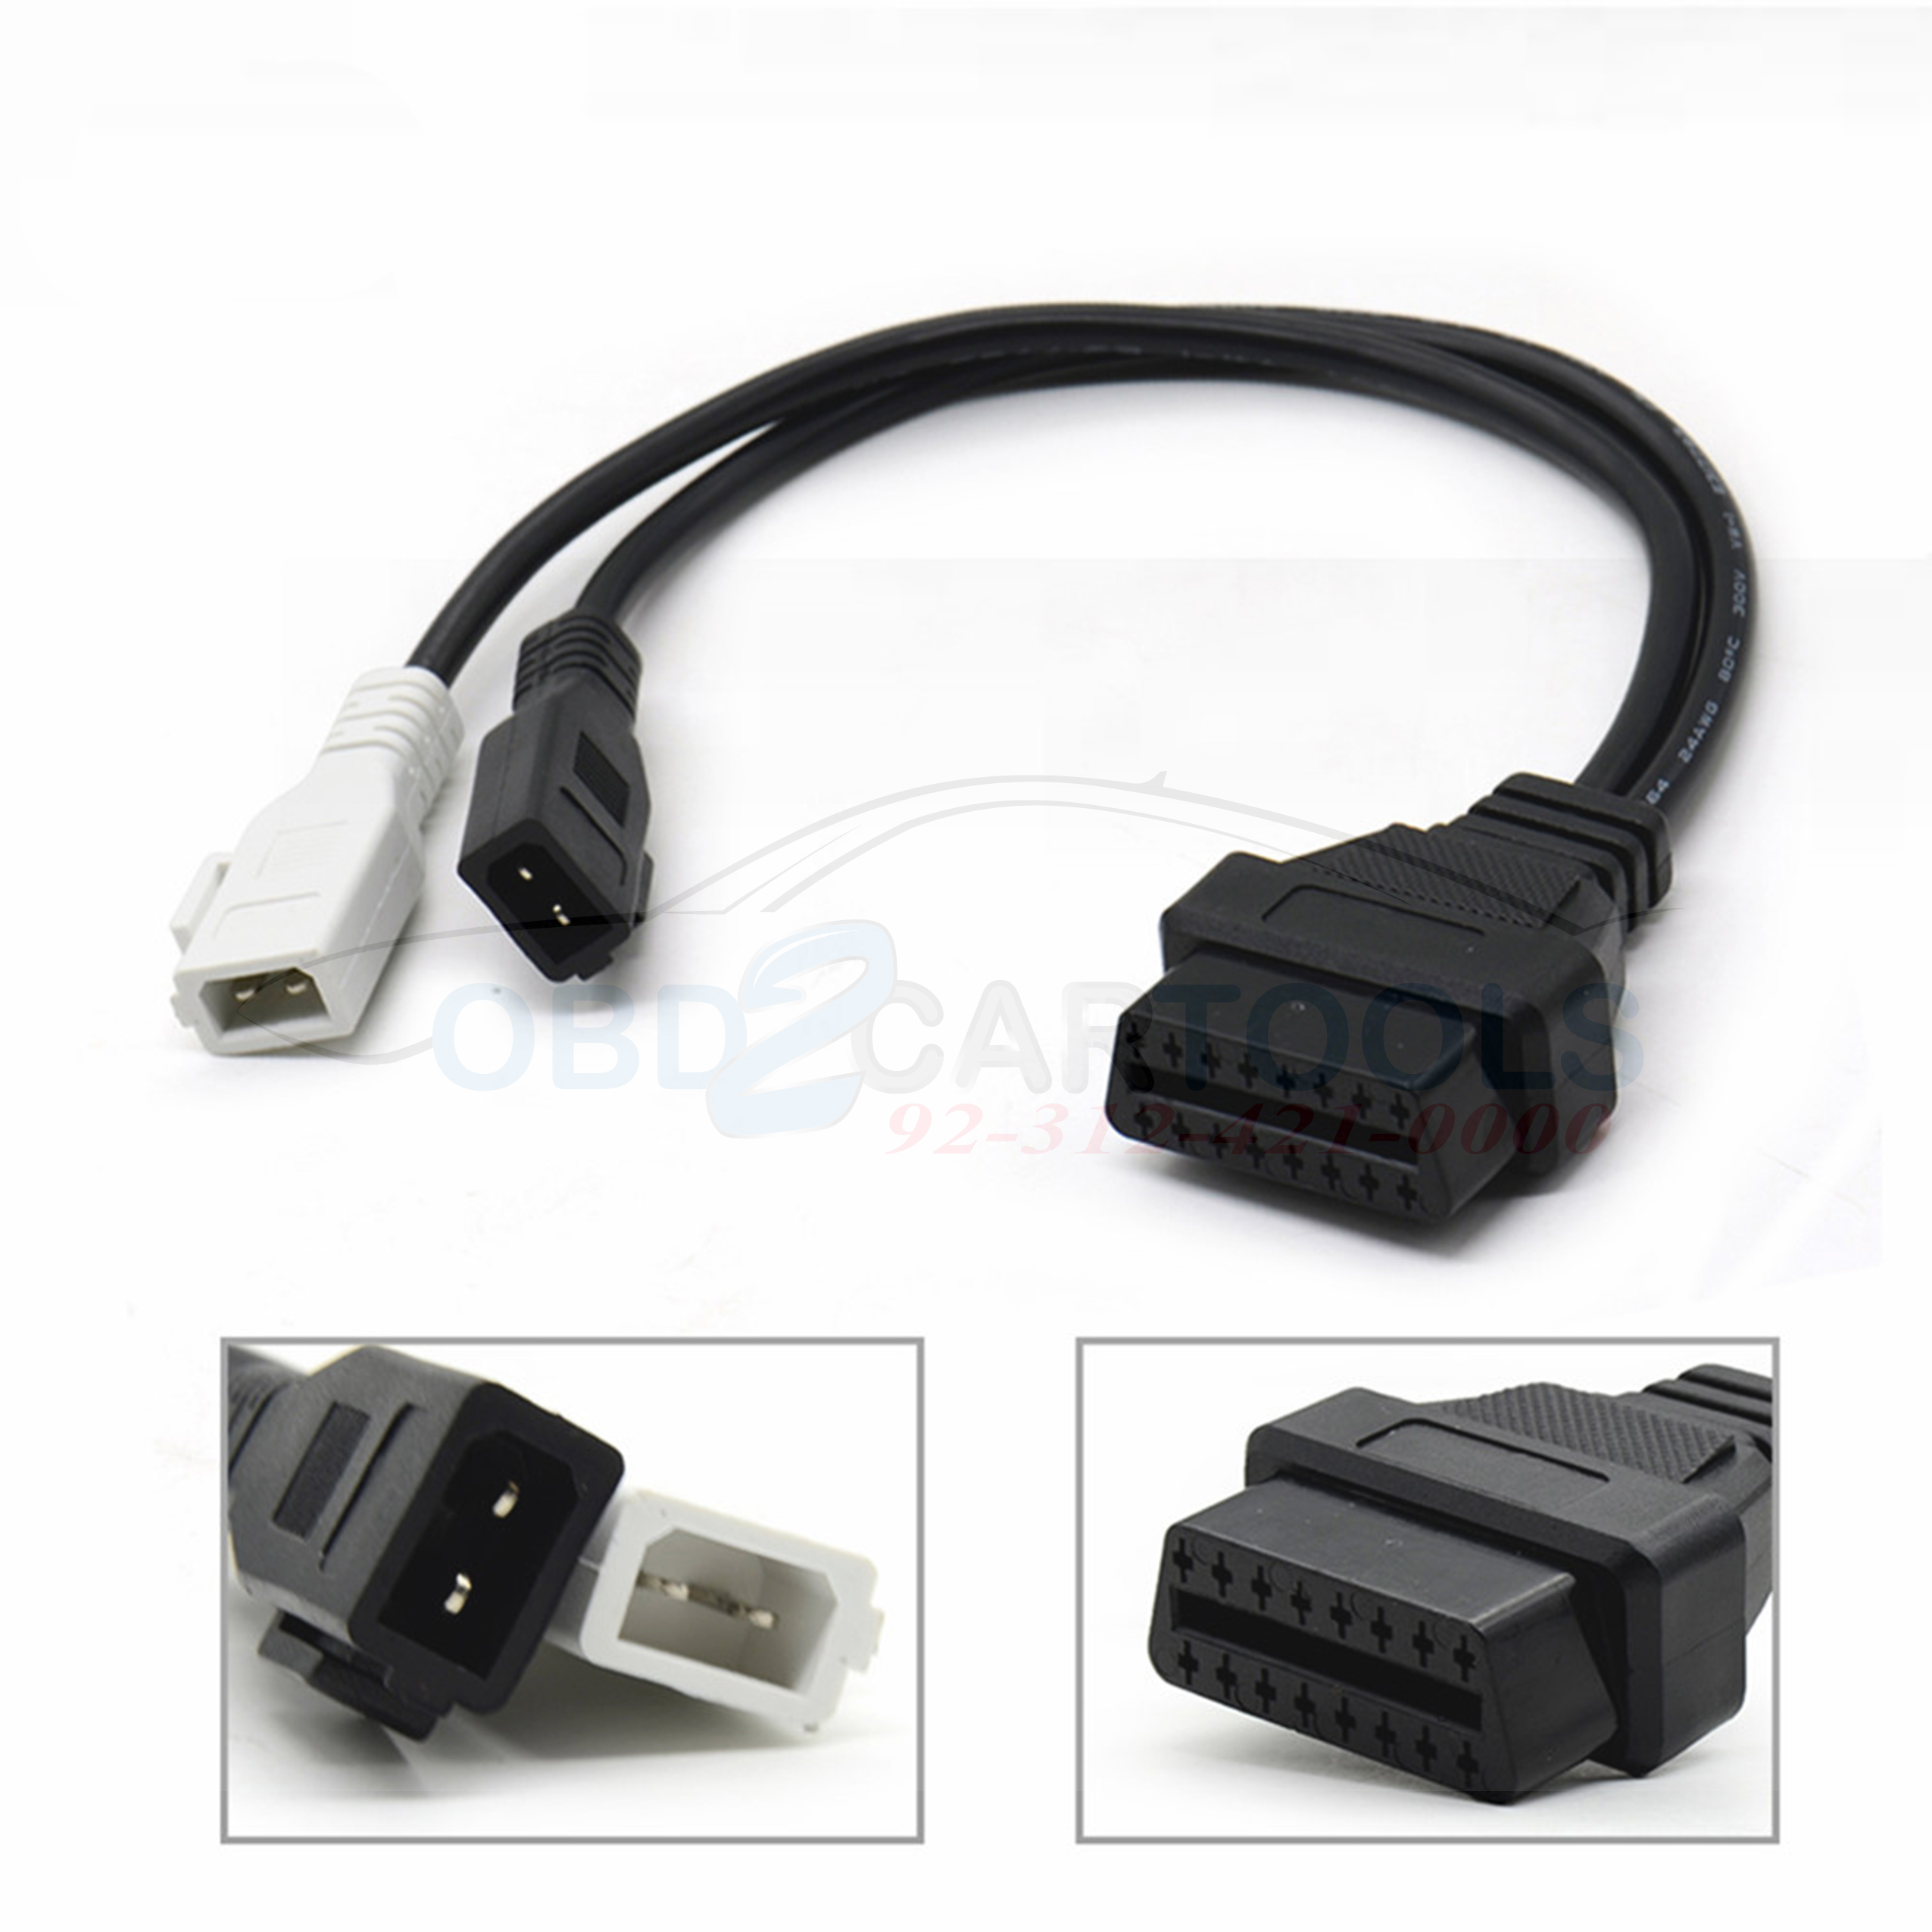 Product image for Audi Skoda VW 2x2 to 16 Pin OBDII Diagnostic Adaptor Cable